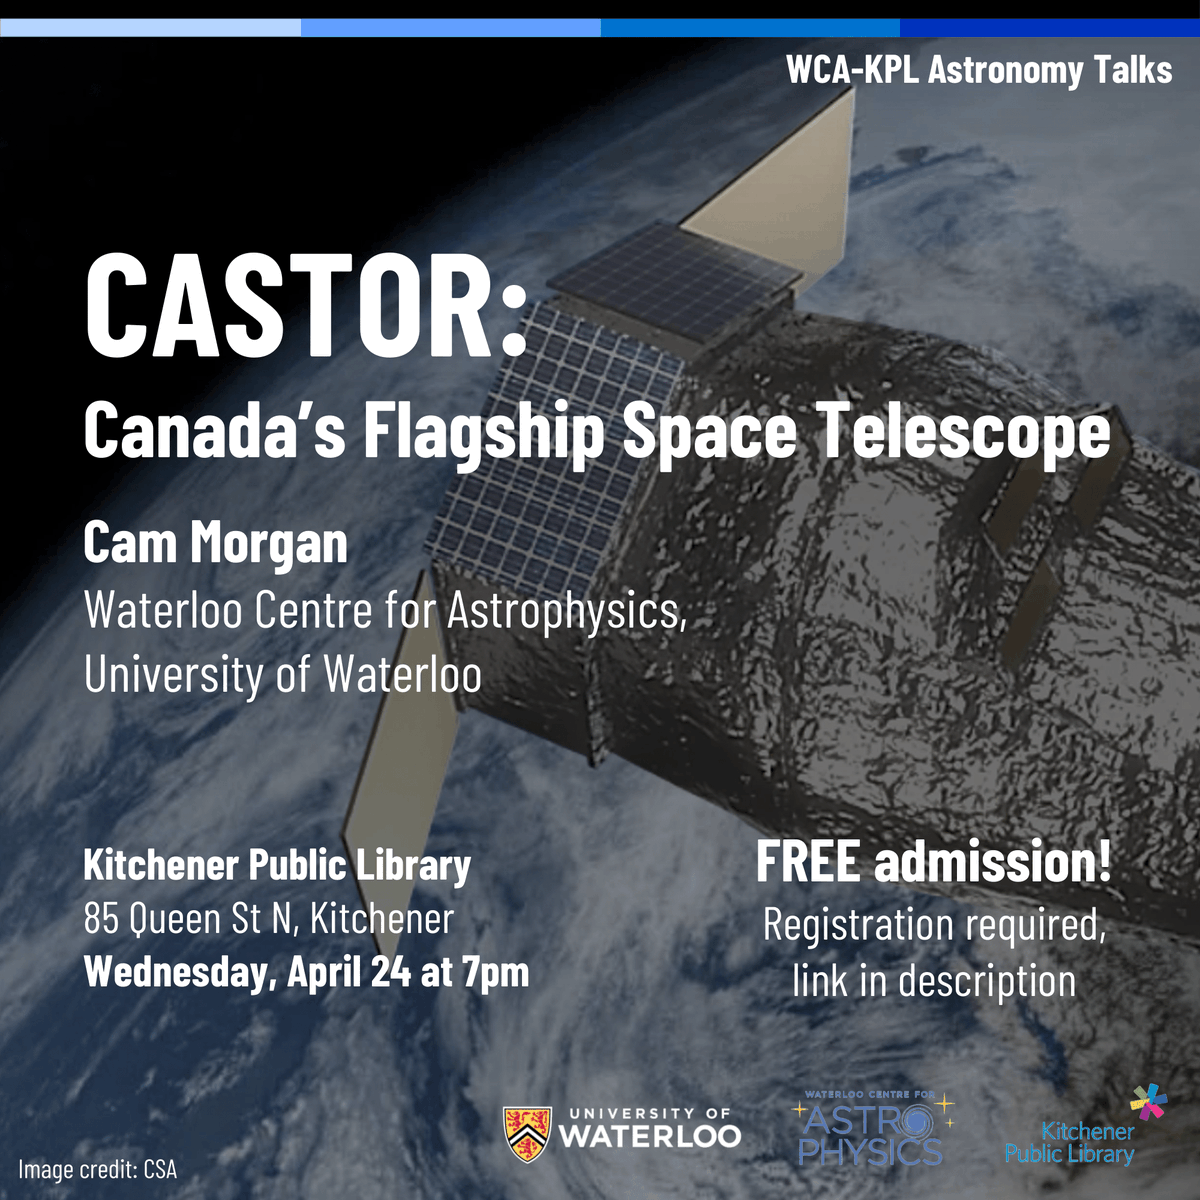 💫Join us on April 24th at 7pm for a new edition of our series of talks at Kitchener Public Library, this time by Cam Morgan who will tell us all about CASTOR, Canada's space telescope. 💫 Entrance is free, register here kpl.events.mylibrary.digital/event?id=67141